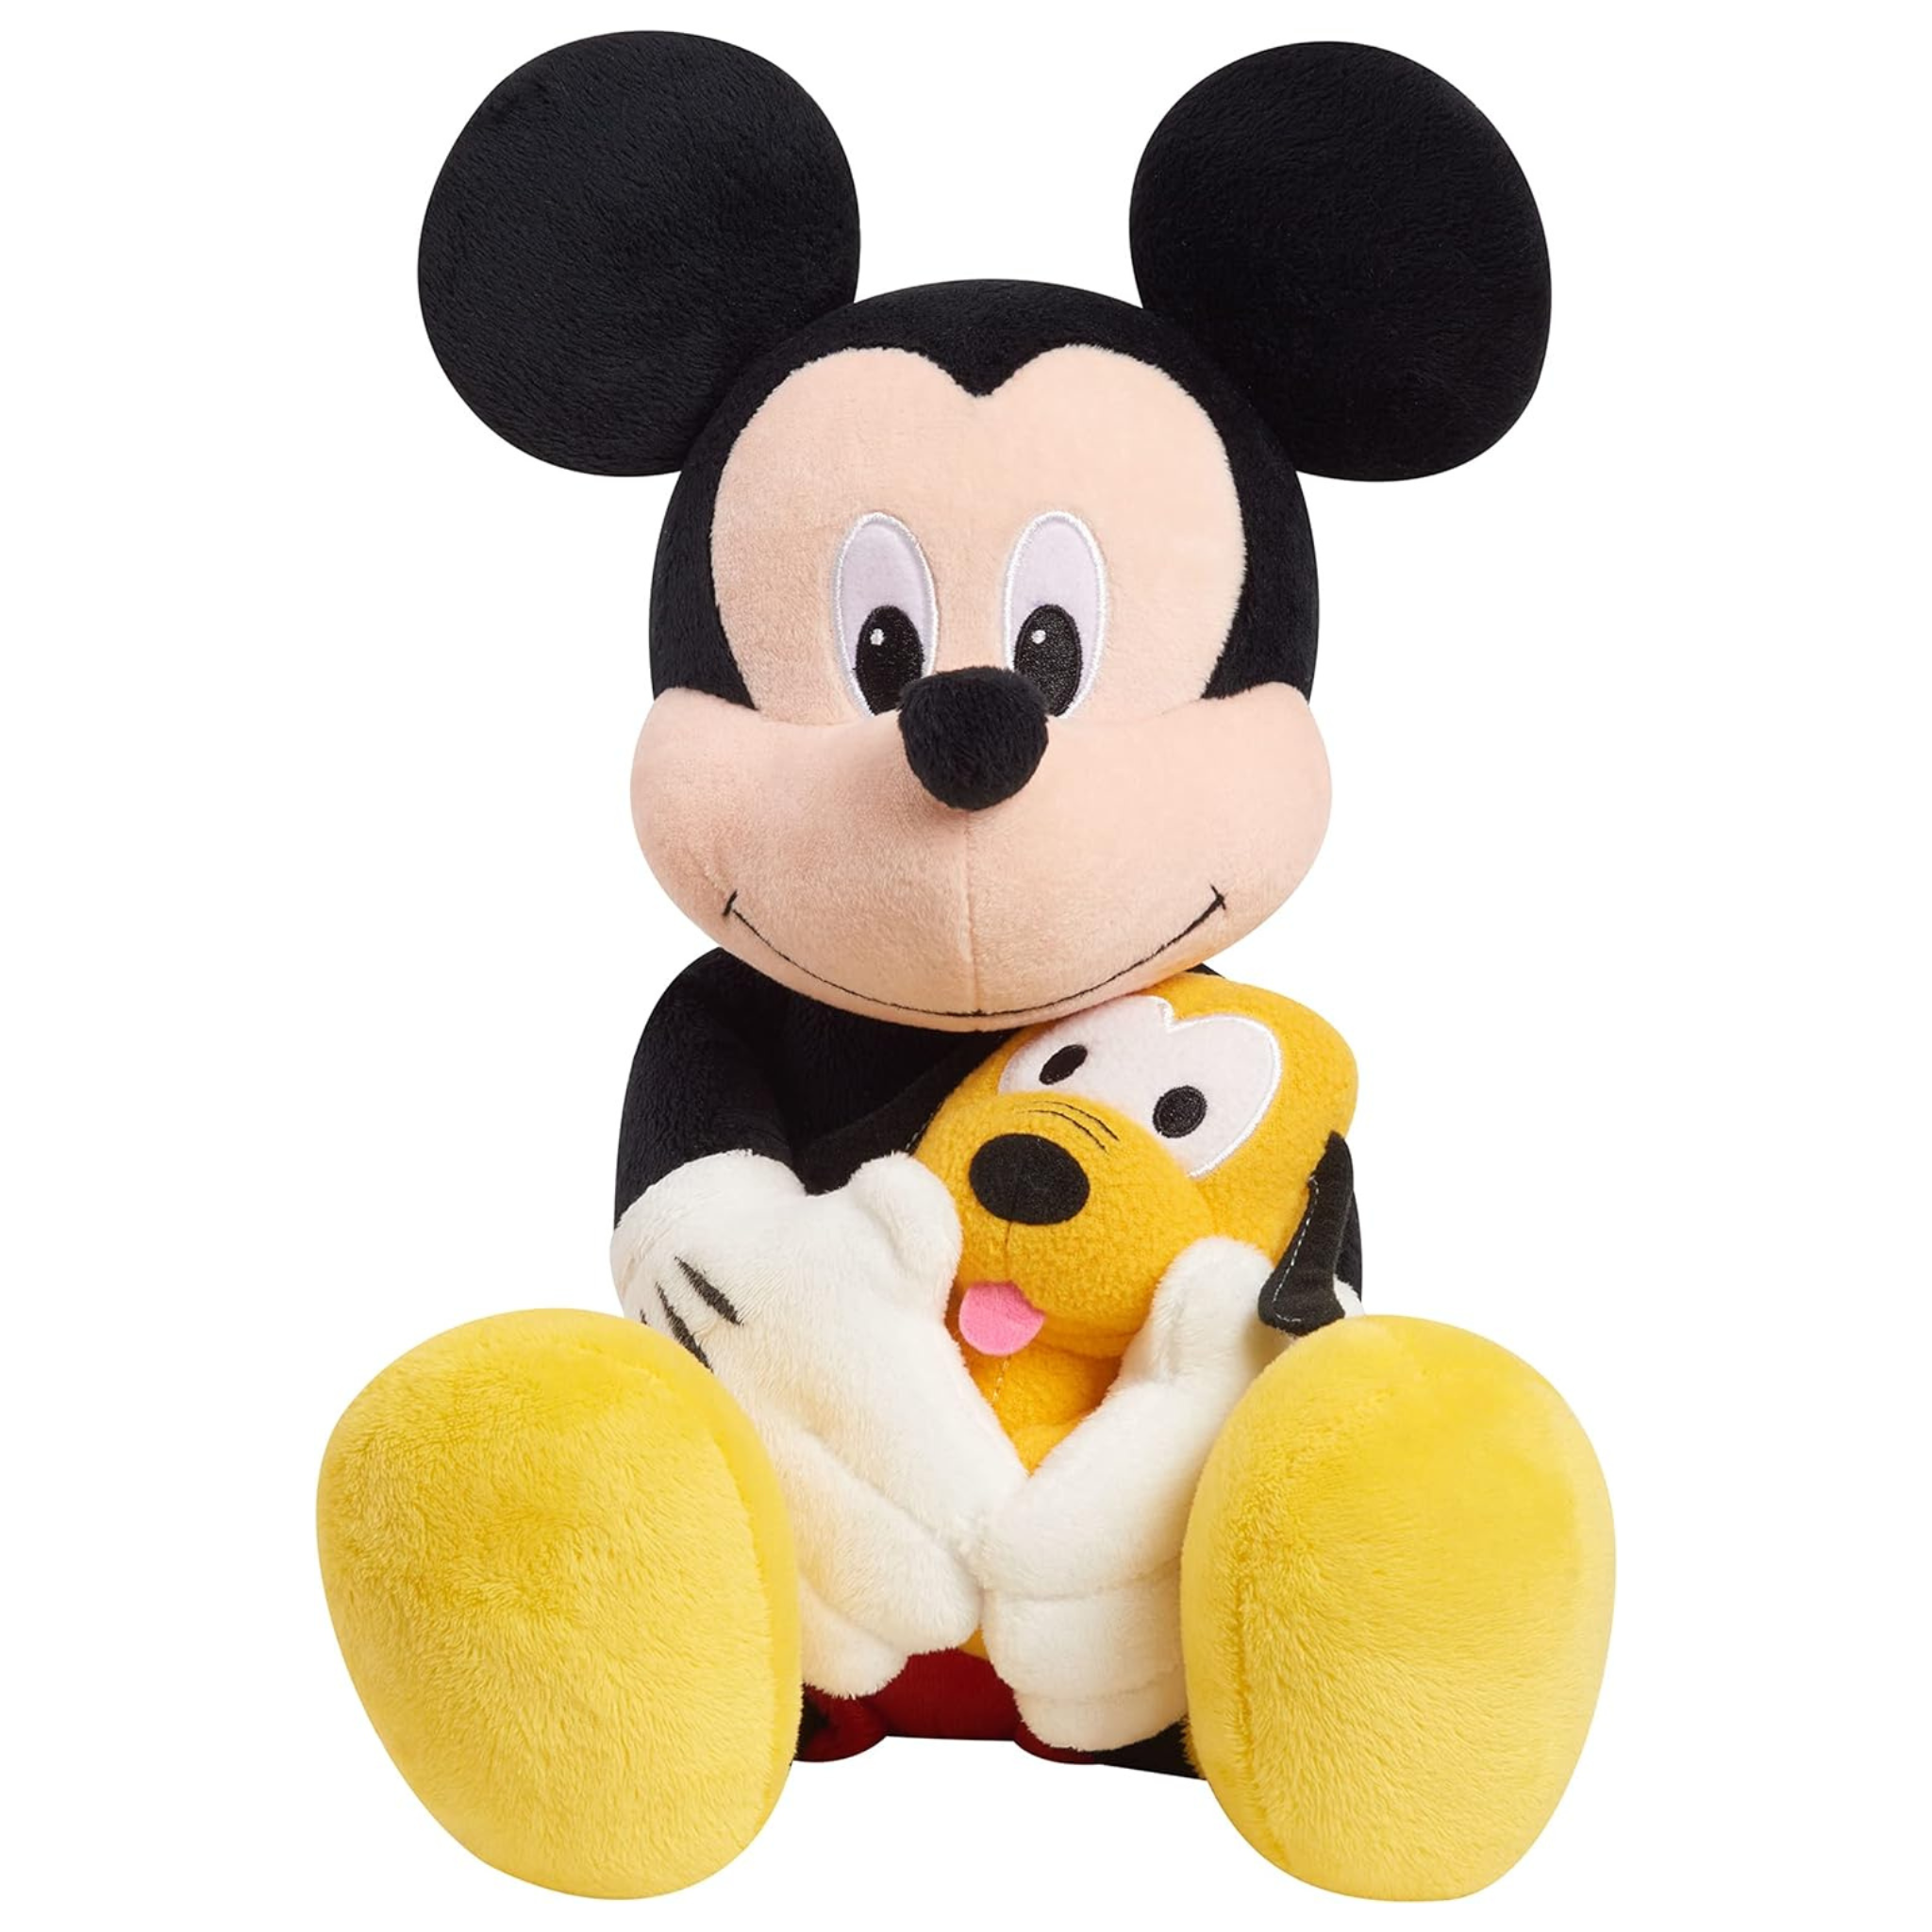 Disney Classics Lil Friends 11.5-inch Mickey Mouse and Pluto Plush Stuffed Animal